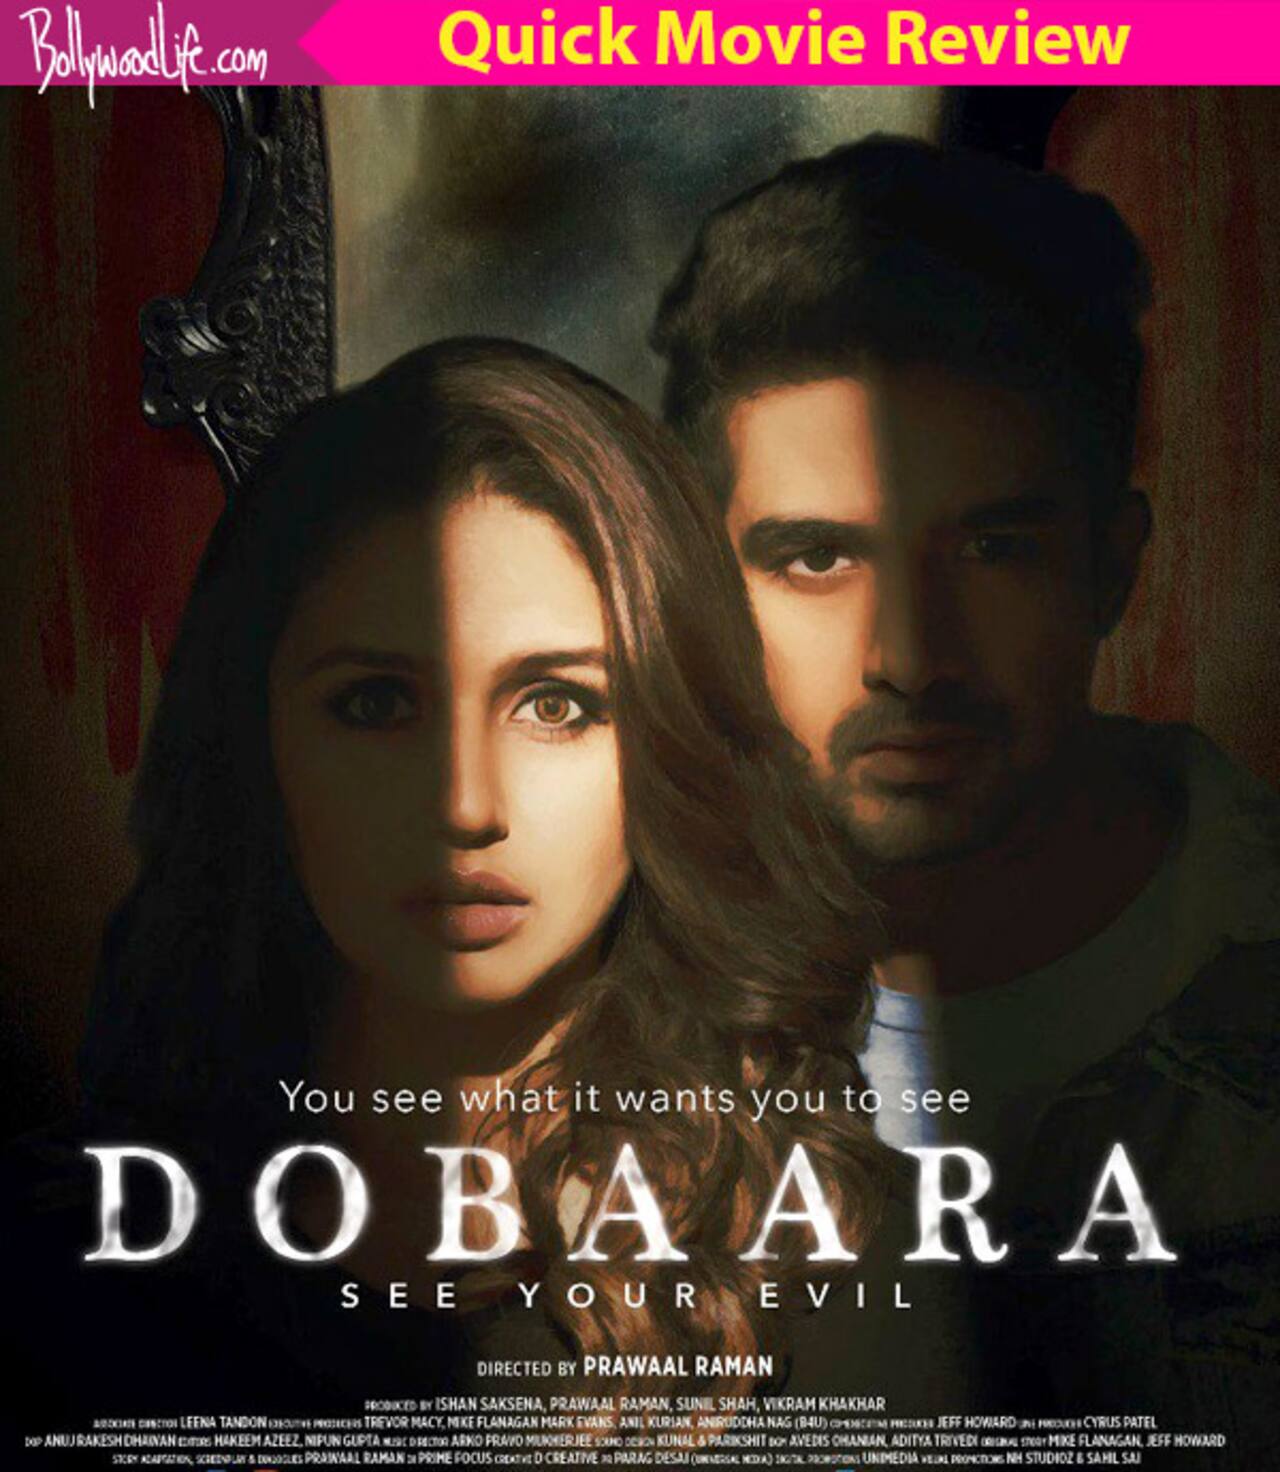 Dobaara Quick Movie Review: Huma Qureshi and Saqib Saleem's film is taking its own sweet time to build the tension